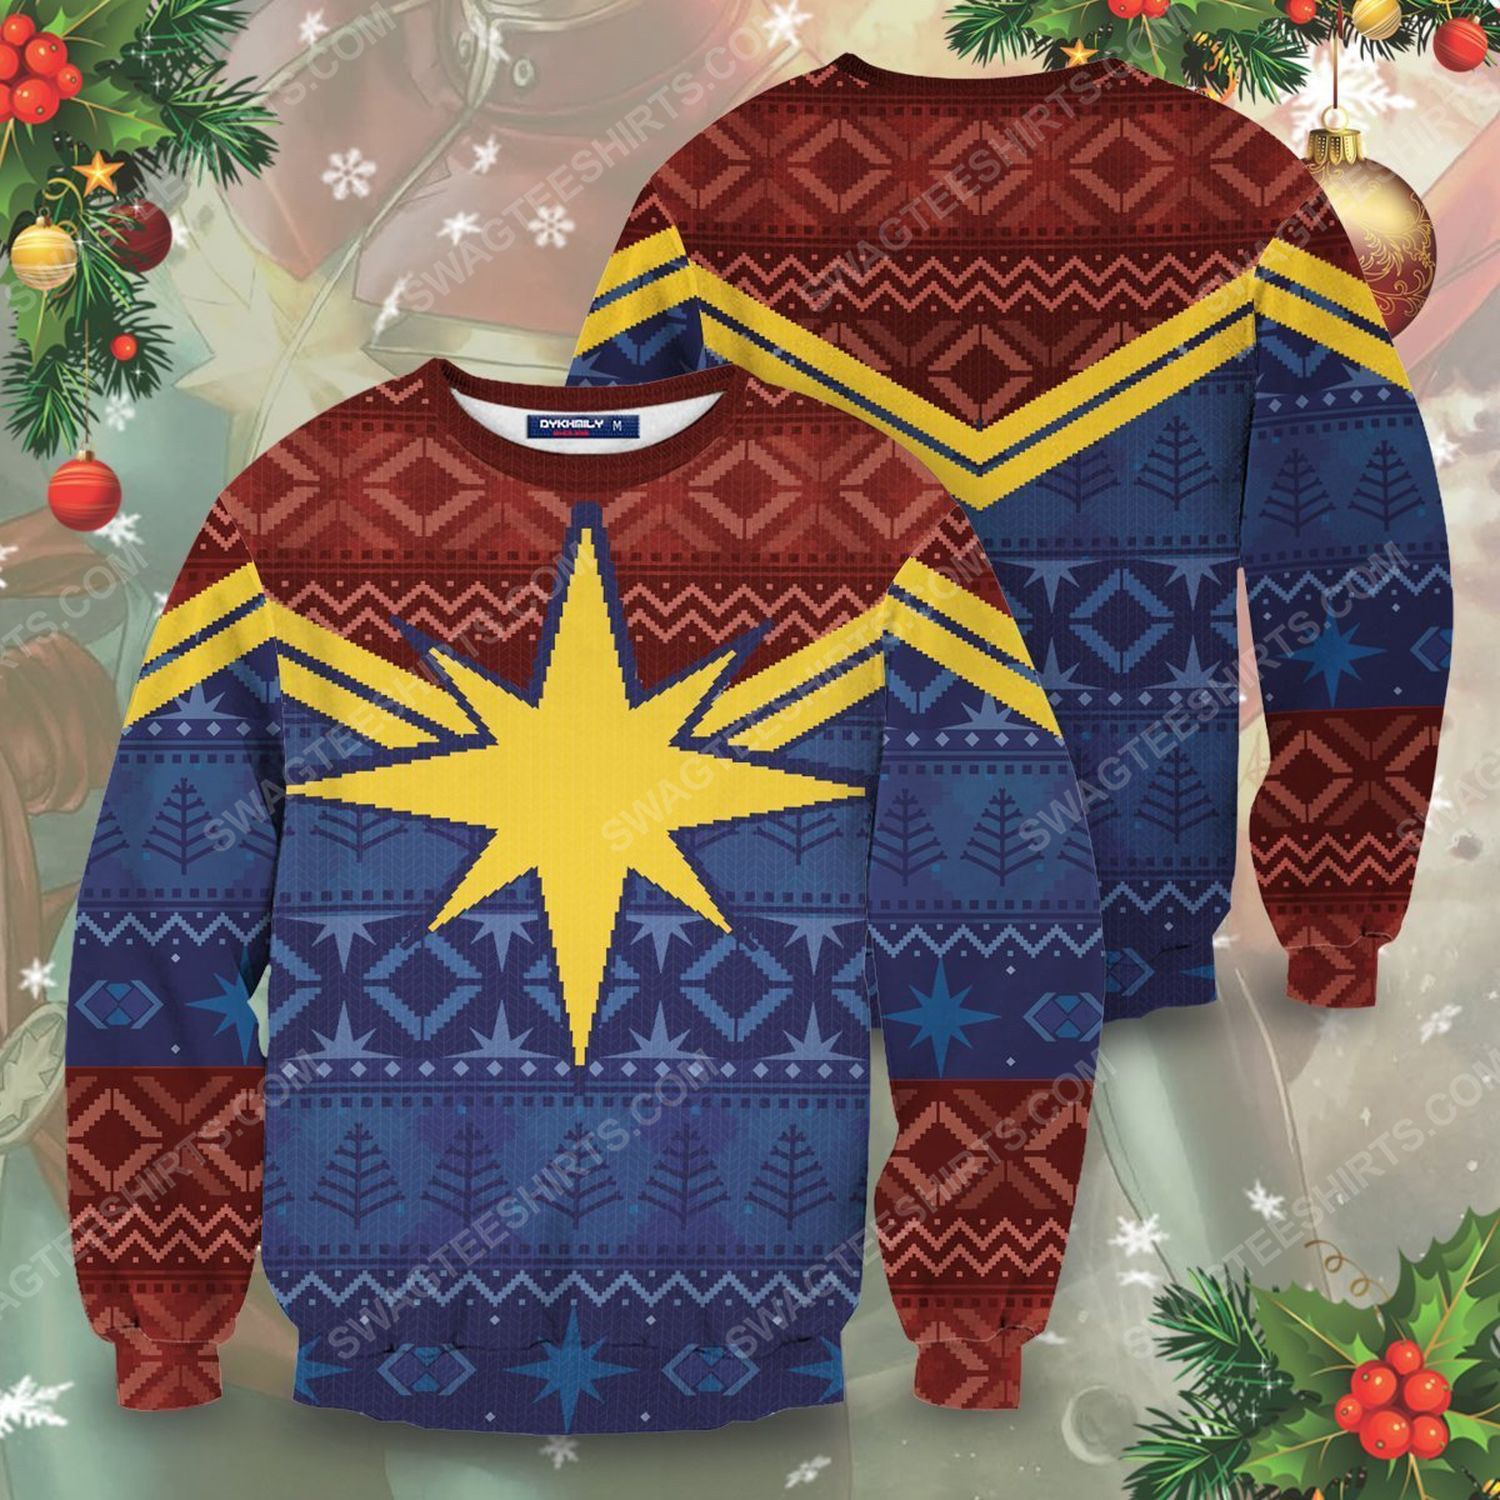 [special edition] Protector of christmas skies full print ugly christmas sweater – maria